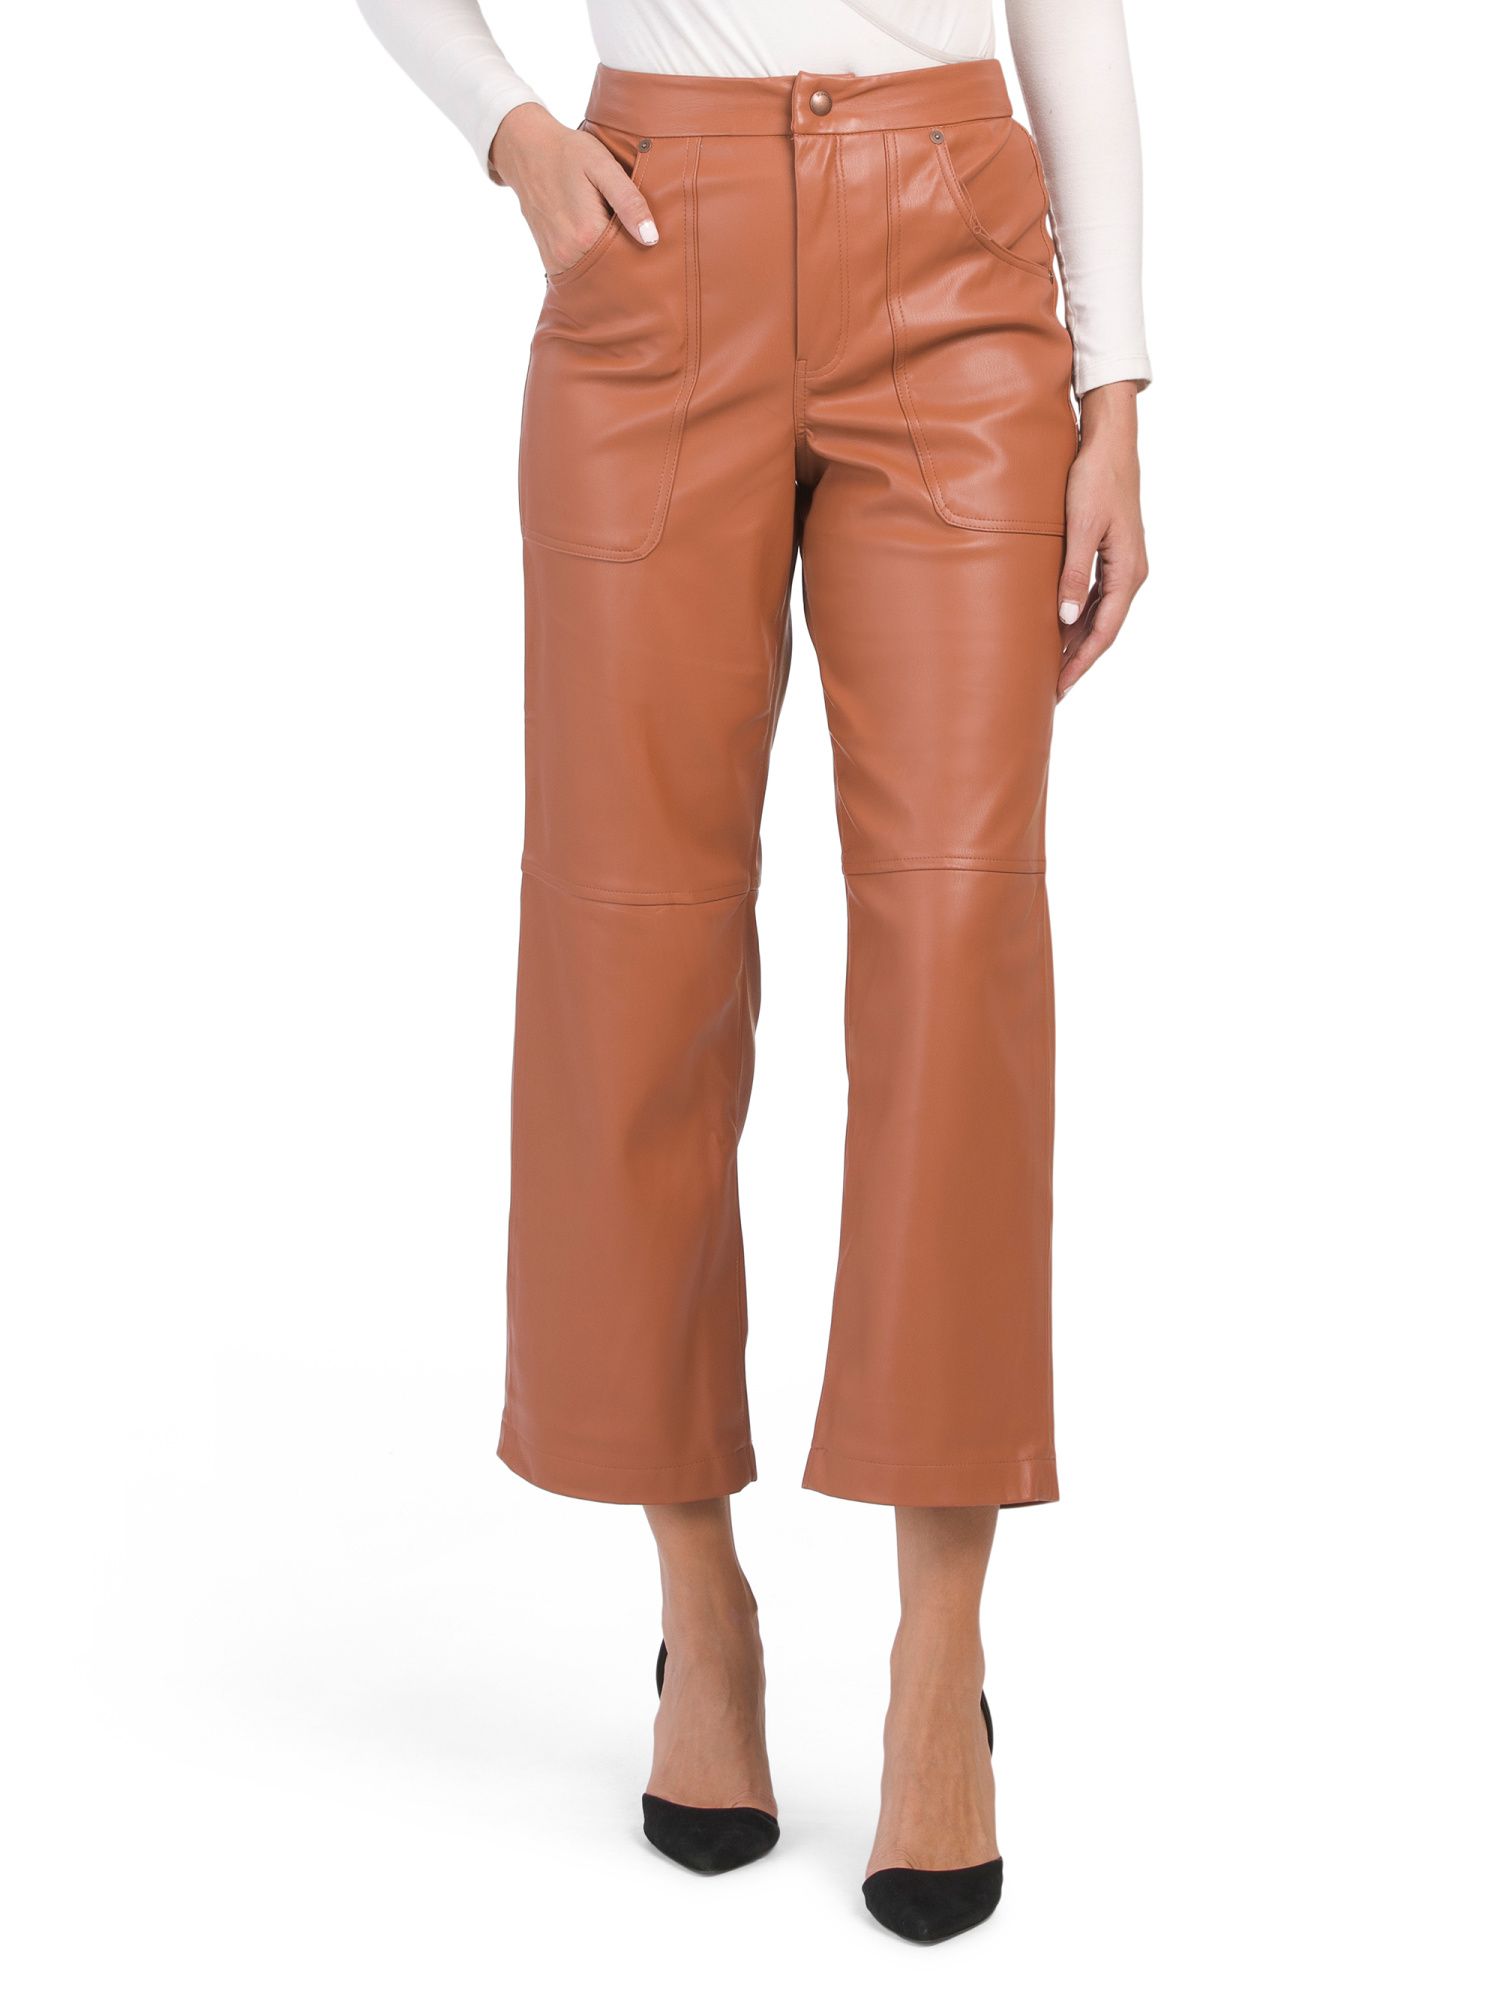 Track Record Faux Leather Pants | TJ Maxx